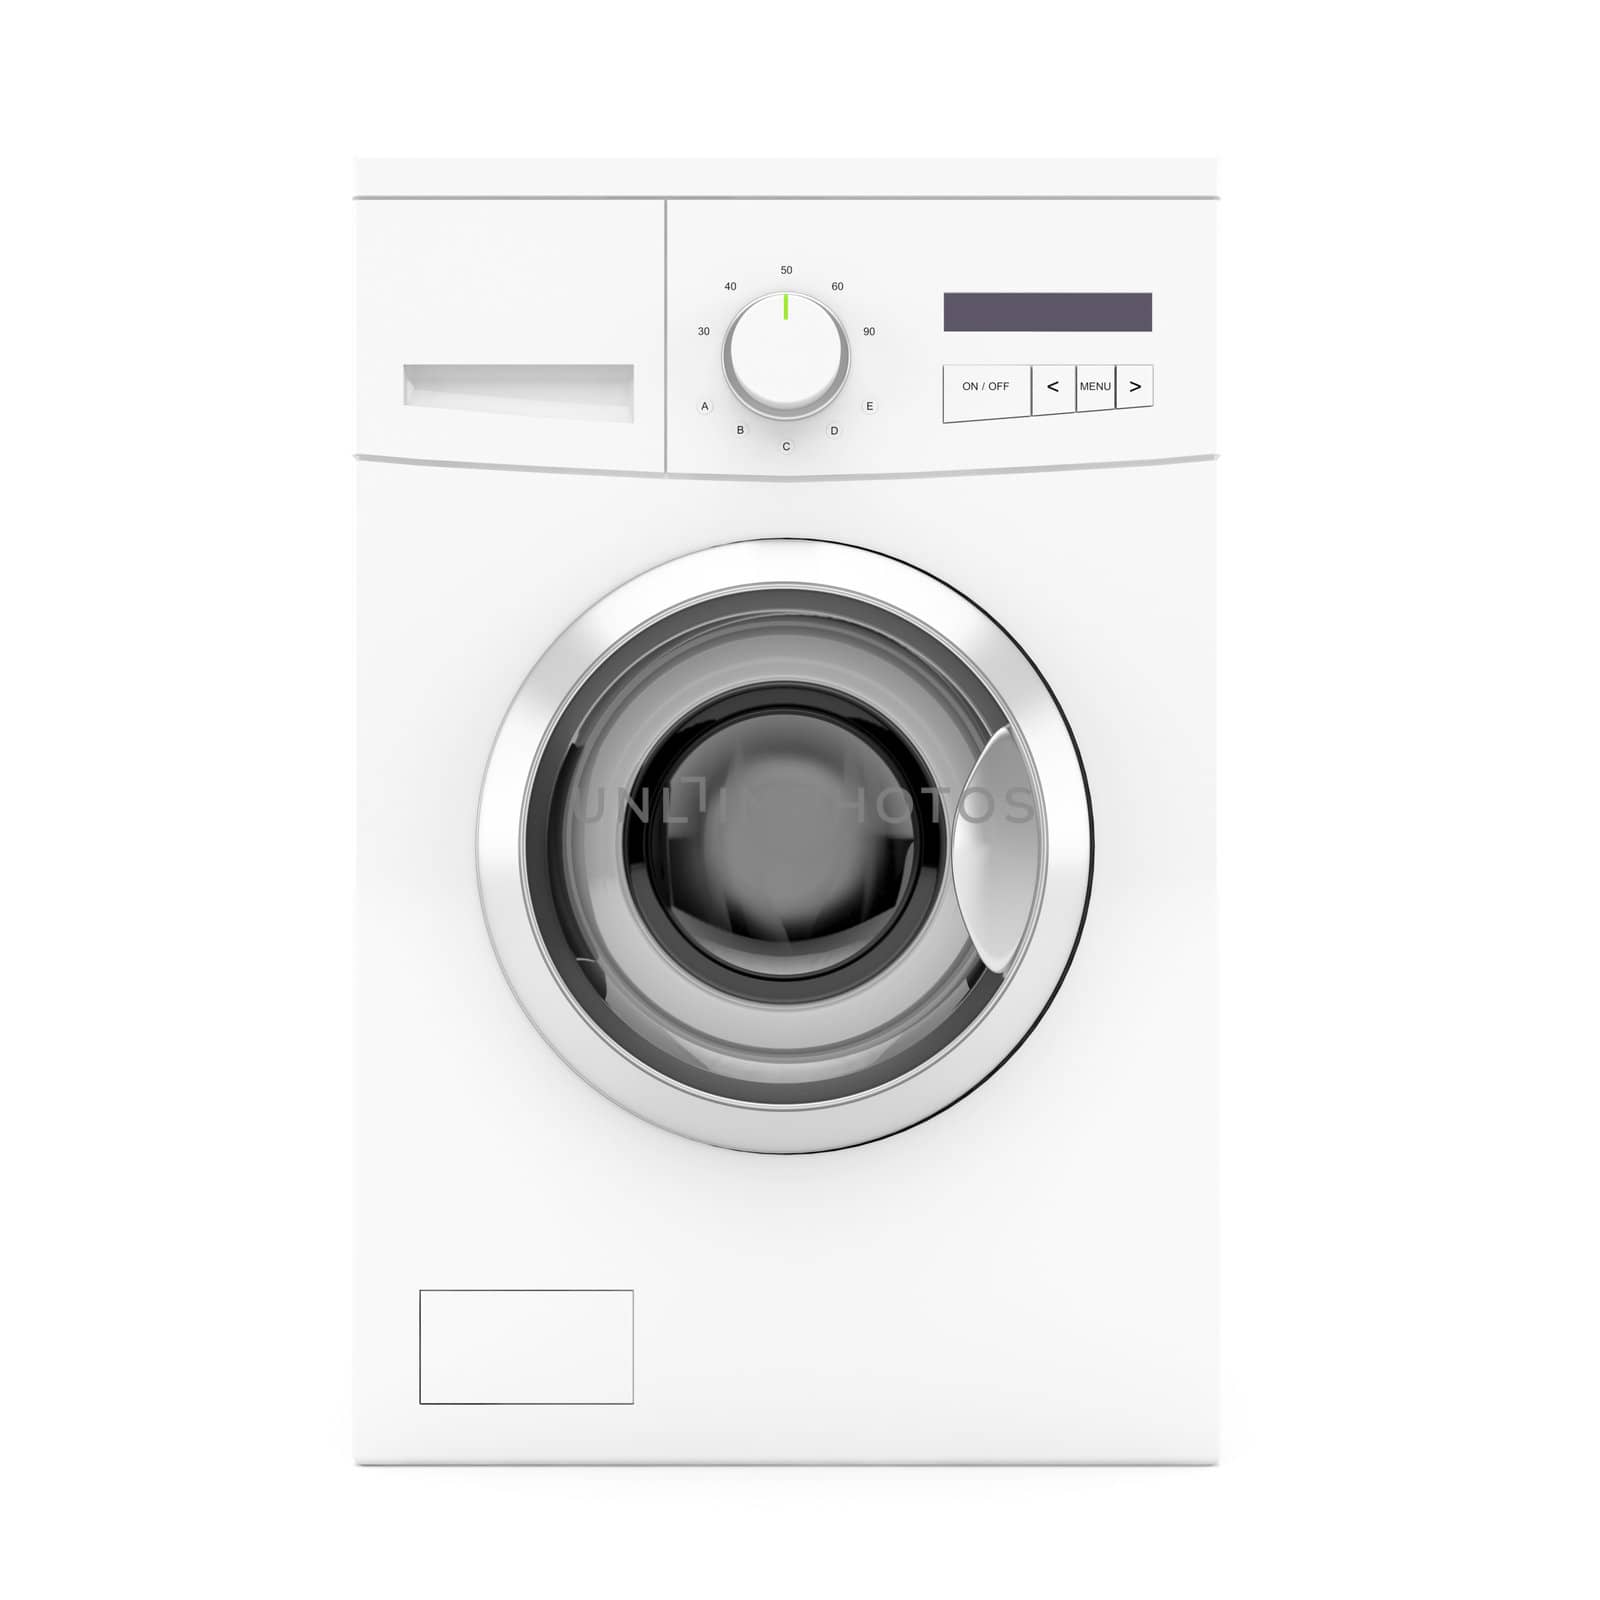 Washing machine - front view by magraphics